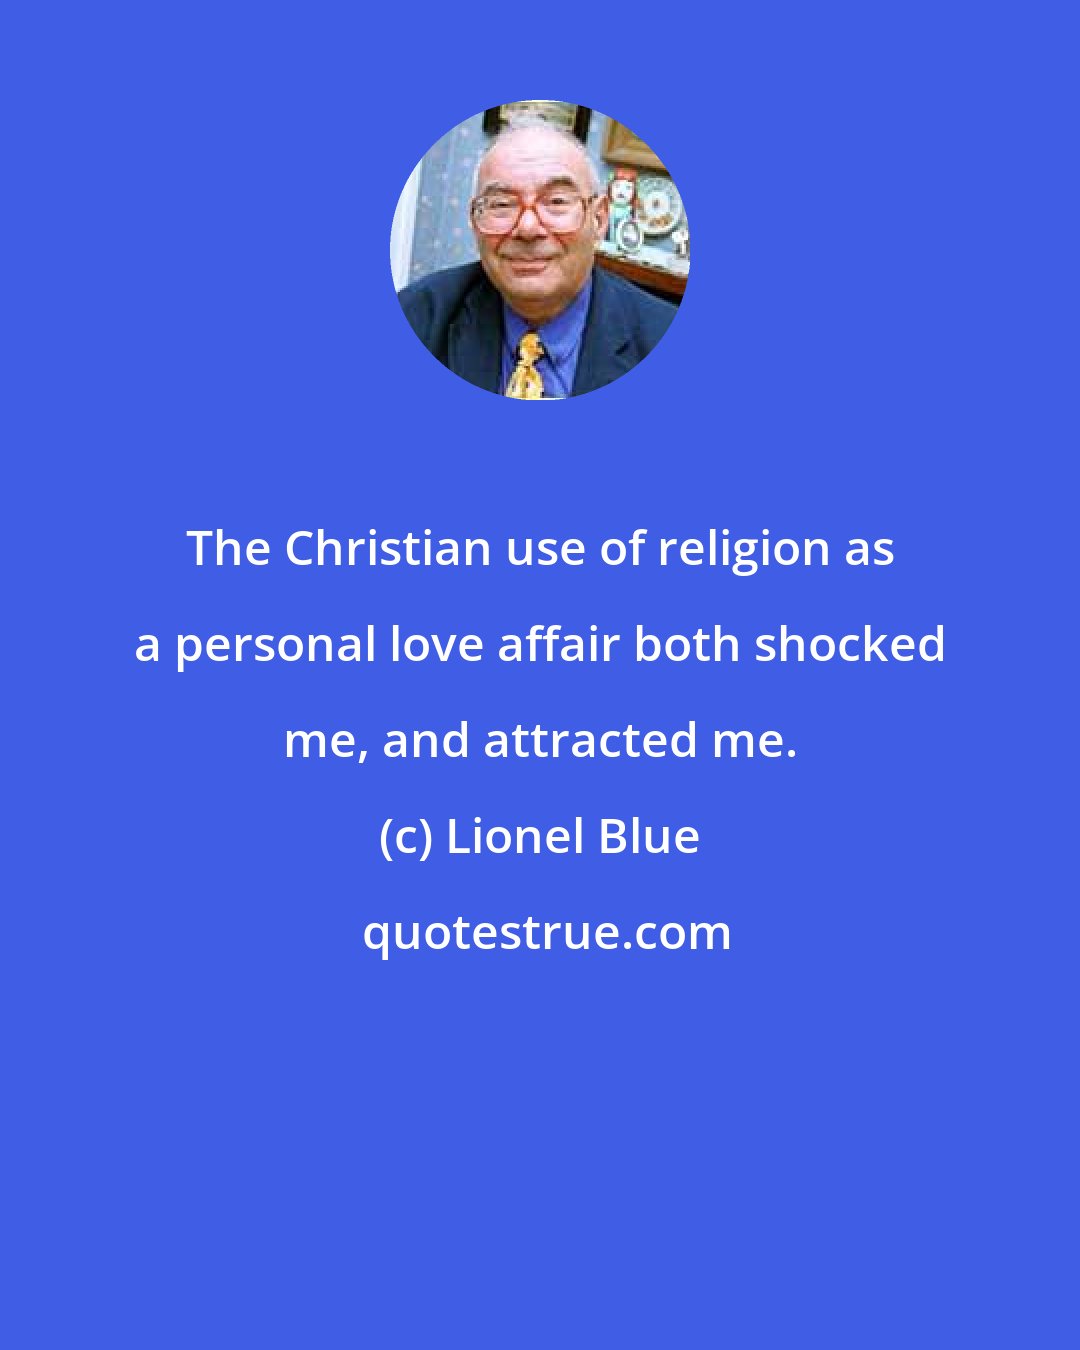 Lionel Blue: The Christian use of religion as a personal love affair both shocked me, and attracted me.